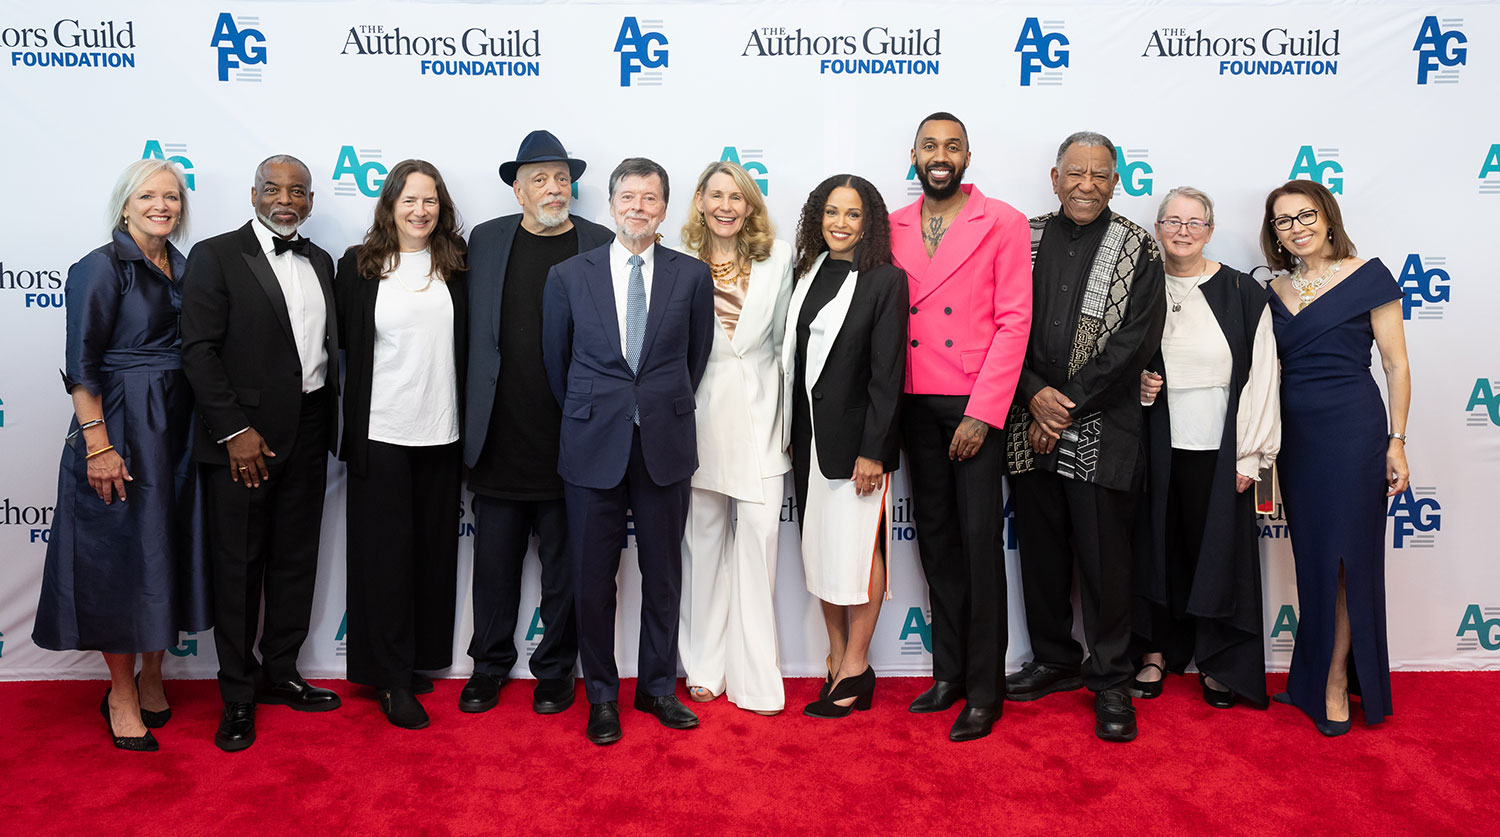 Honorees and Guild leadership pose on the red carpet